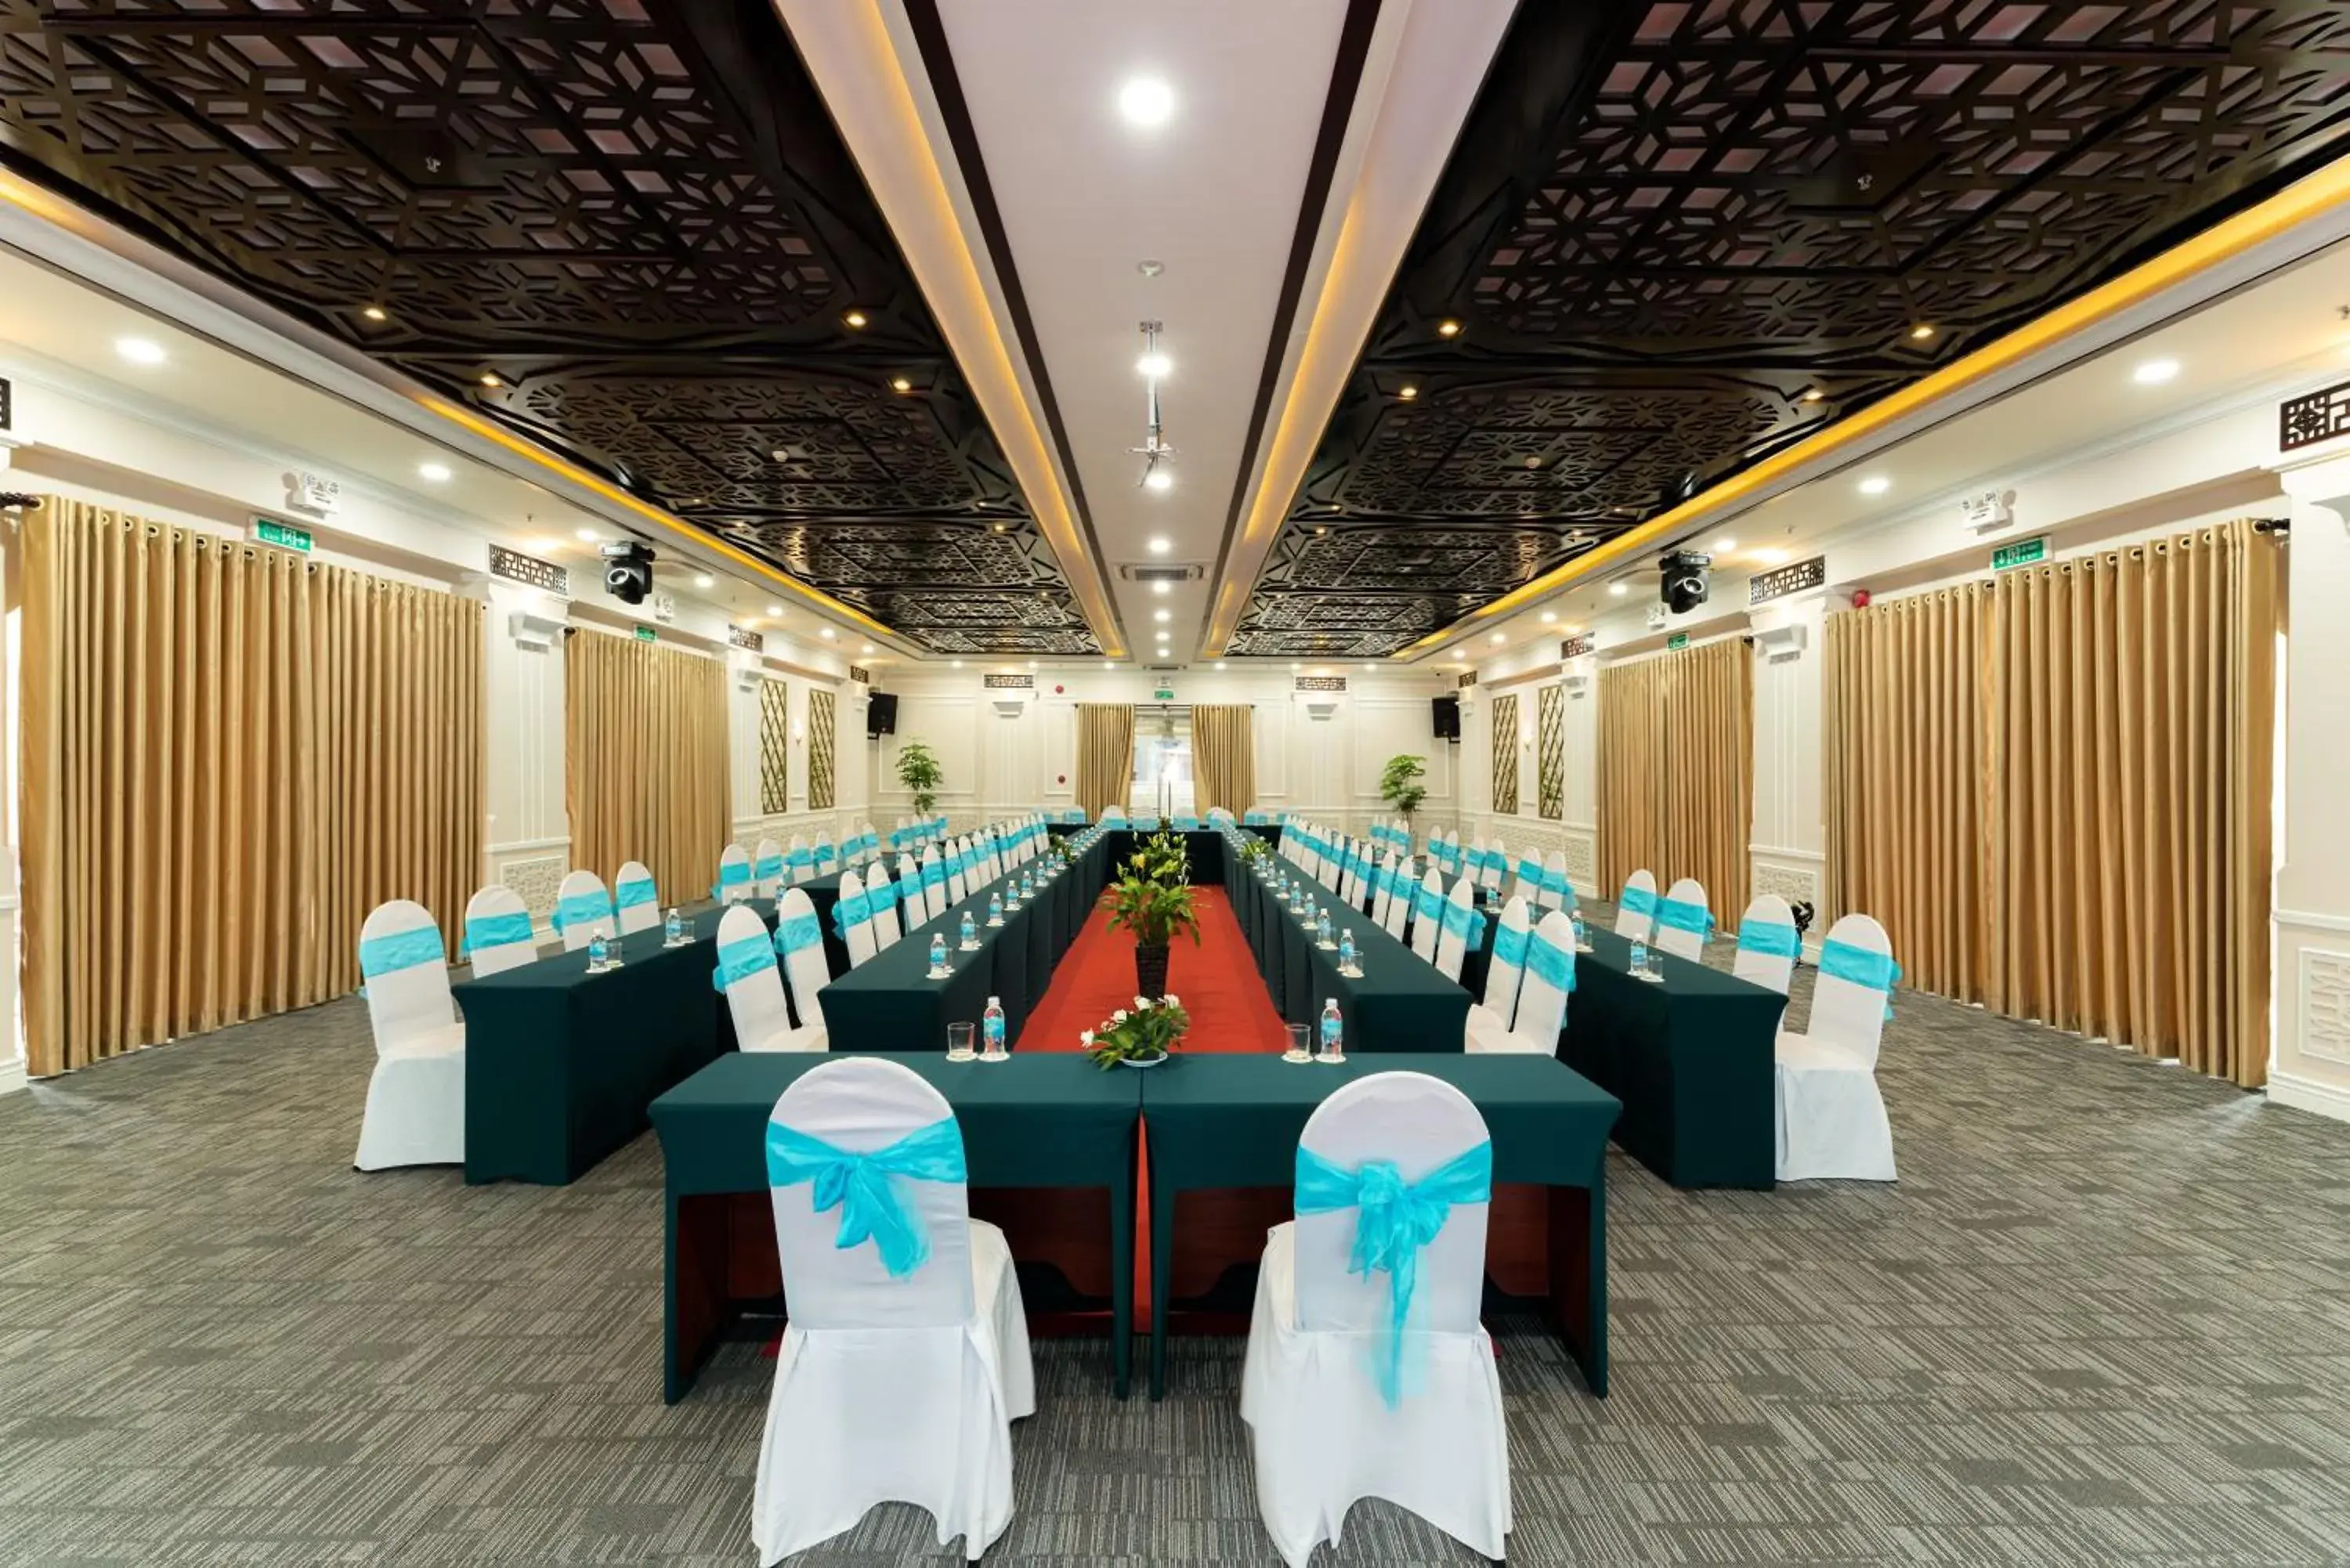 Meeting/conference room, Banquet Facilities in Tran Vien Dong